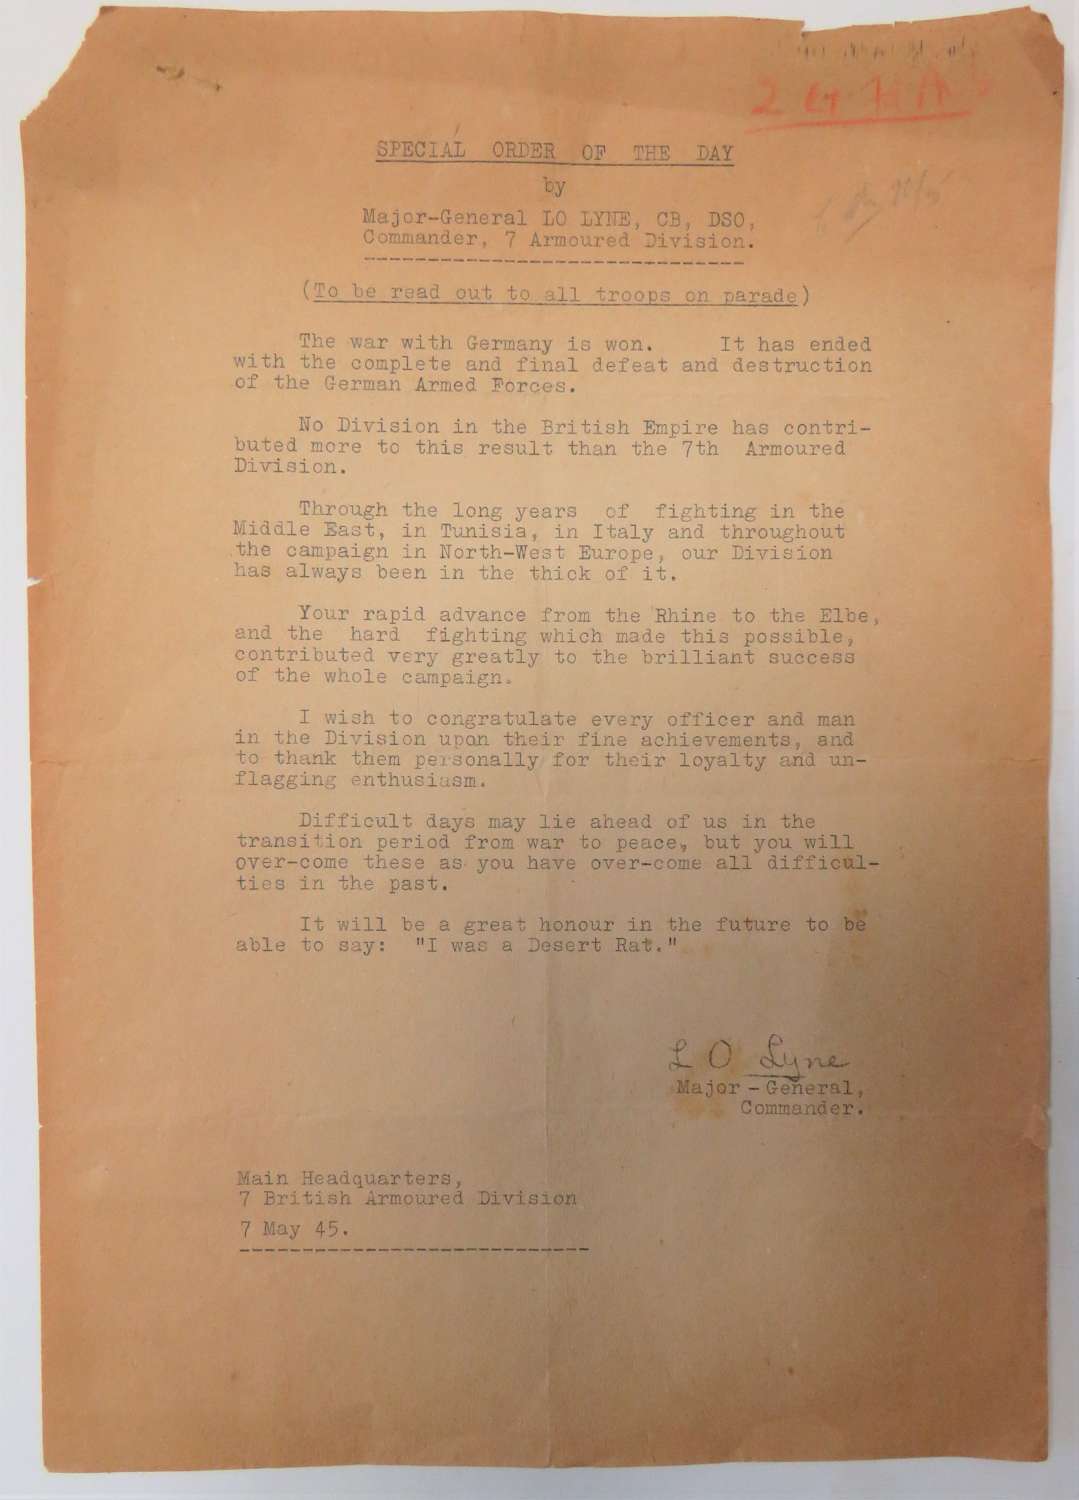 May 1945 7th Armoured Division Special Message of the Day Paperwork